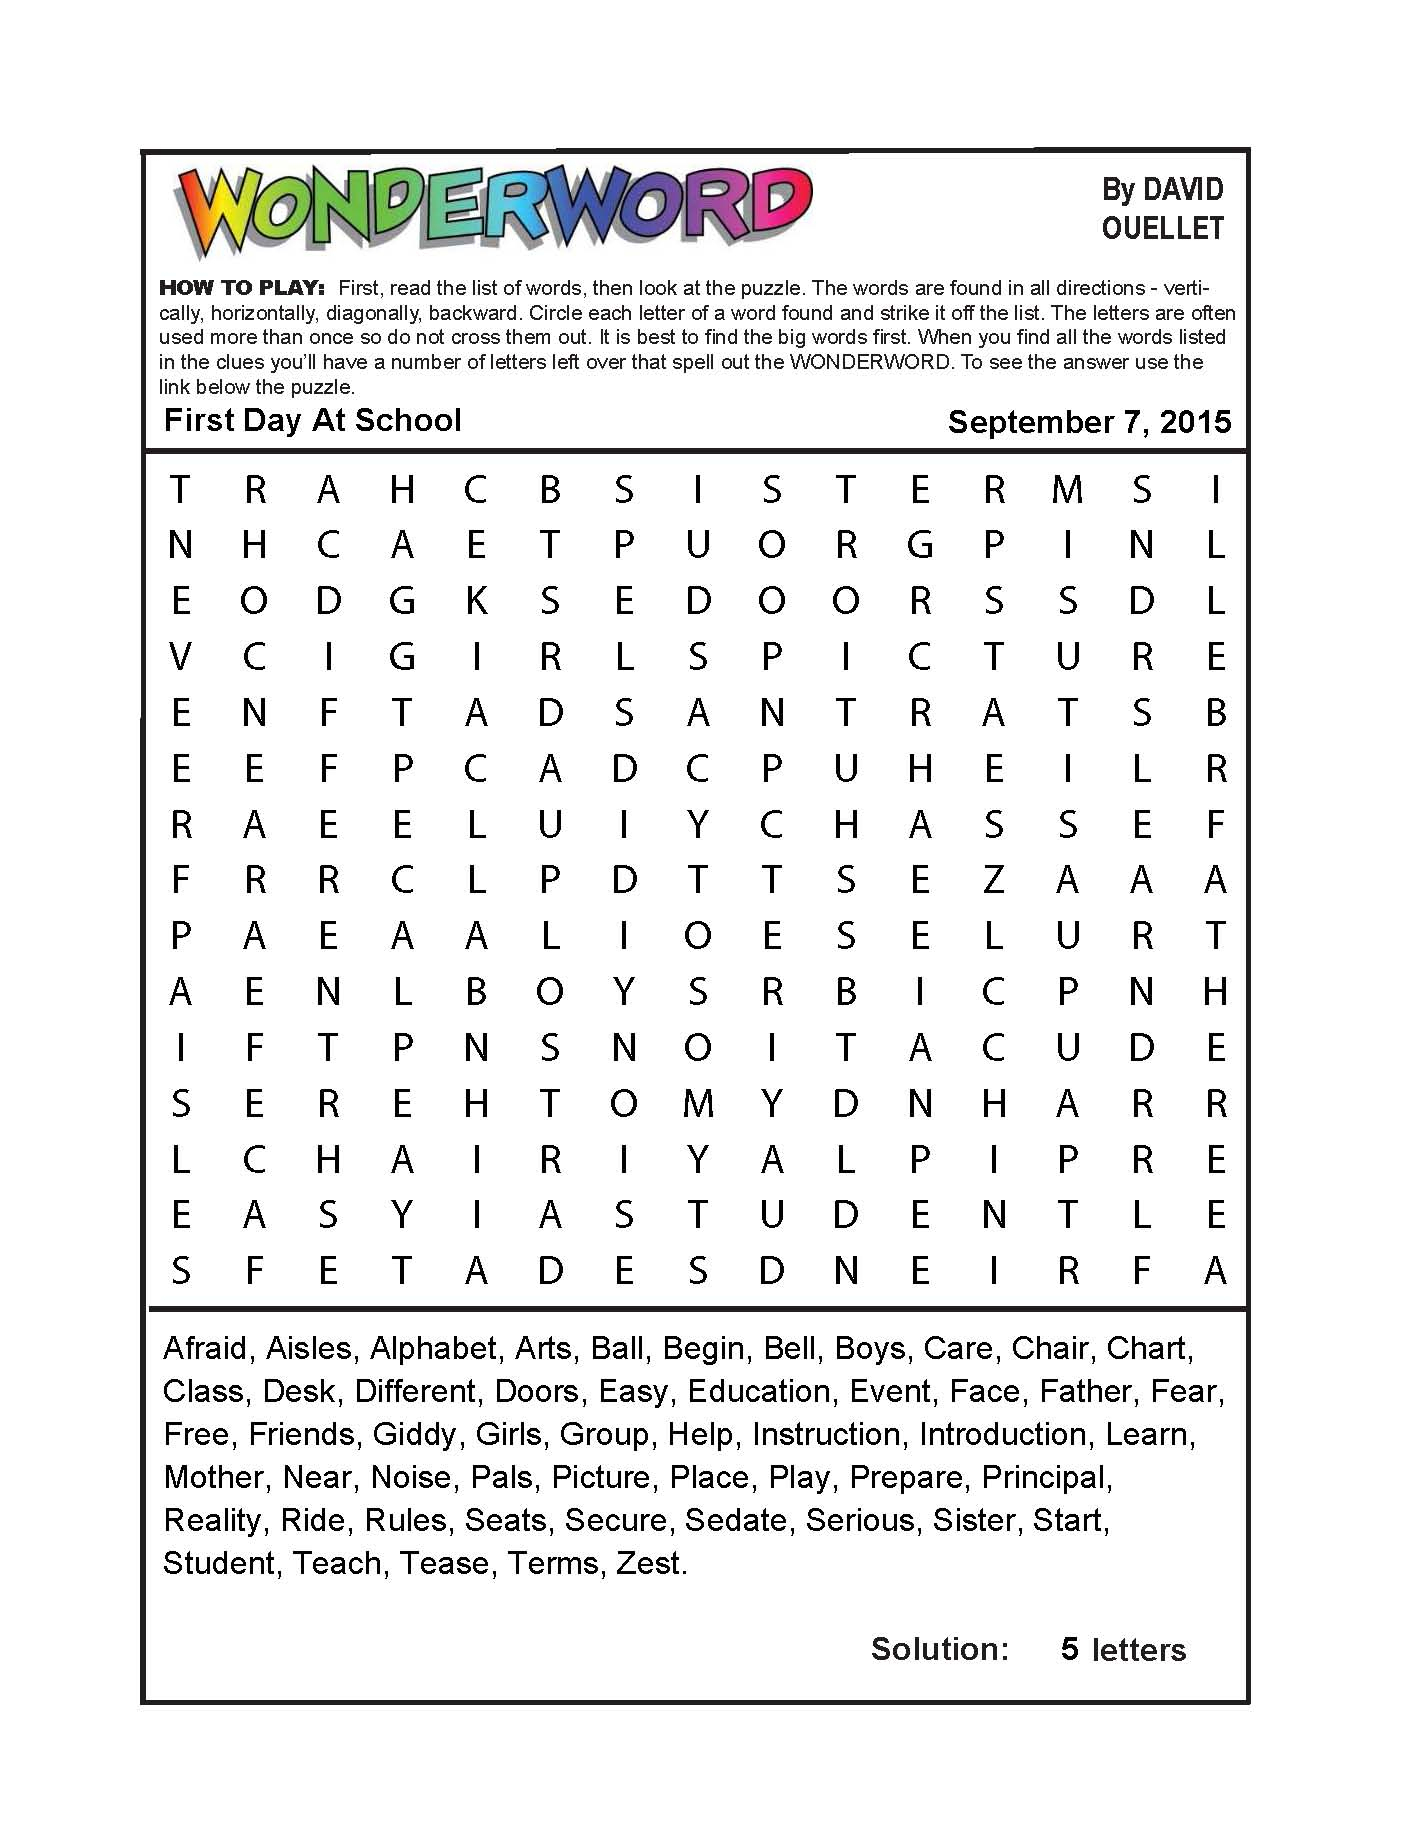 First Day At School - Printable Wonderword Puzzles Download